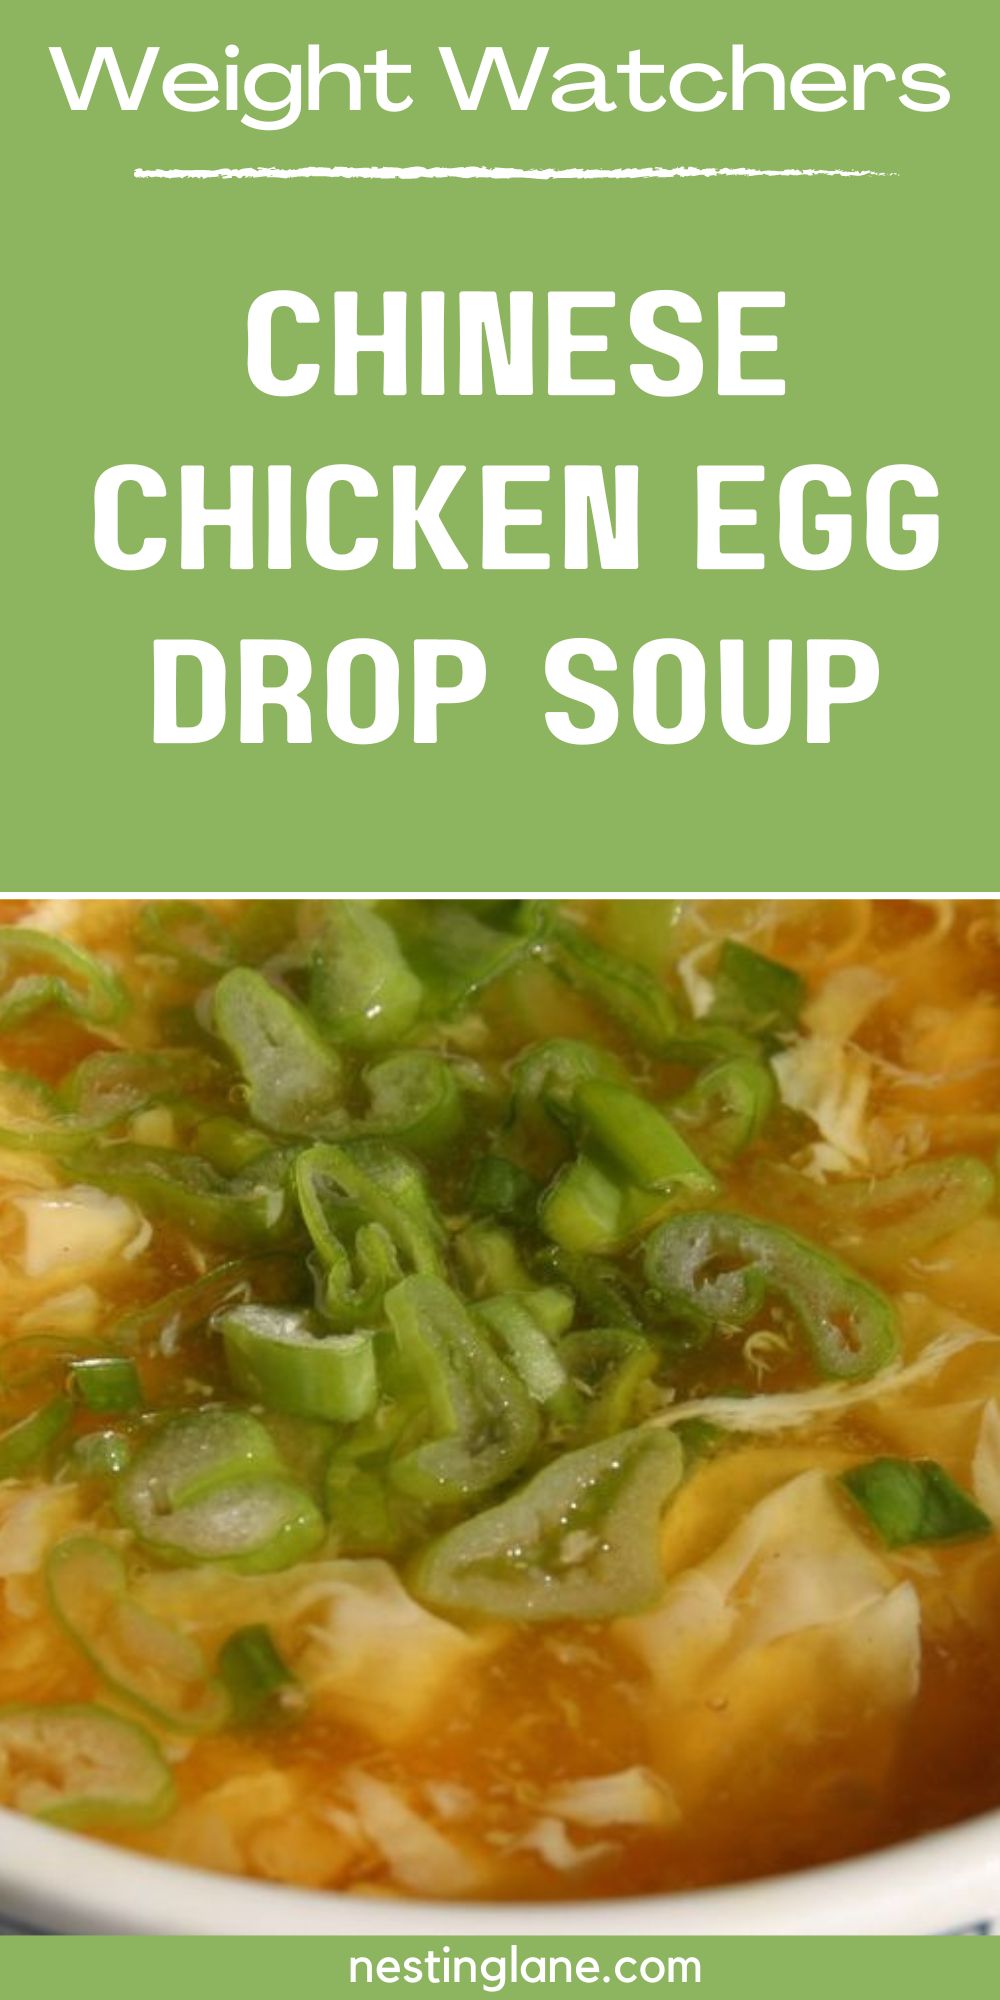 Chicken Egg Drop Soup graphic.